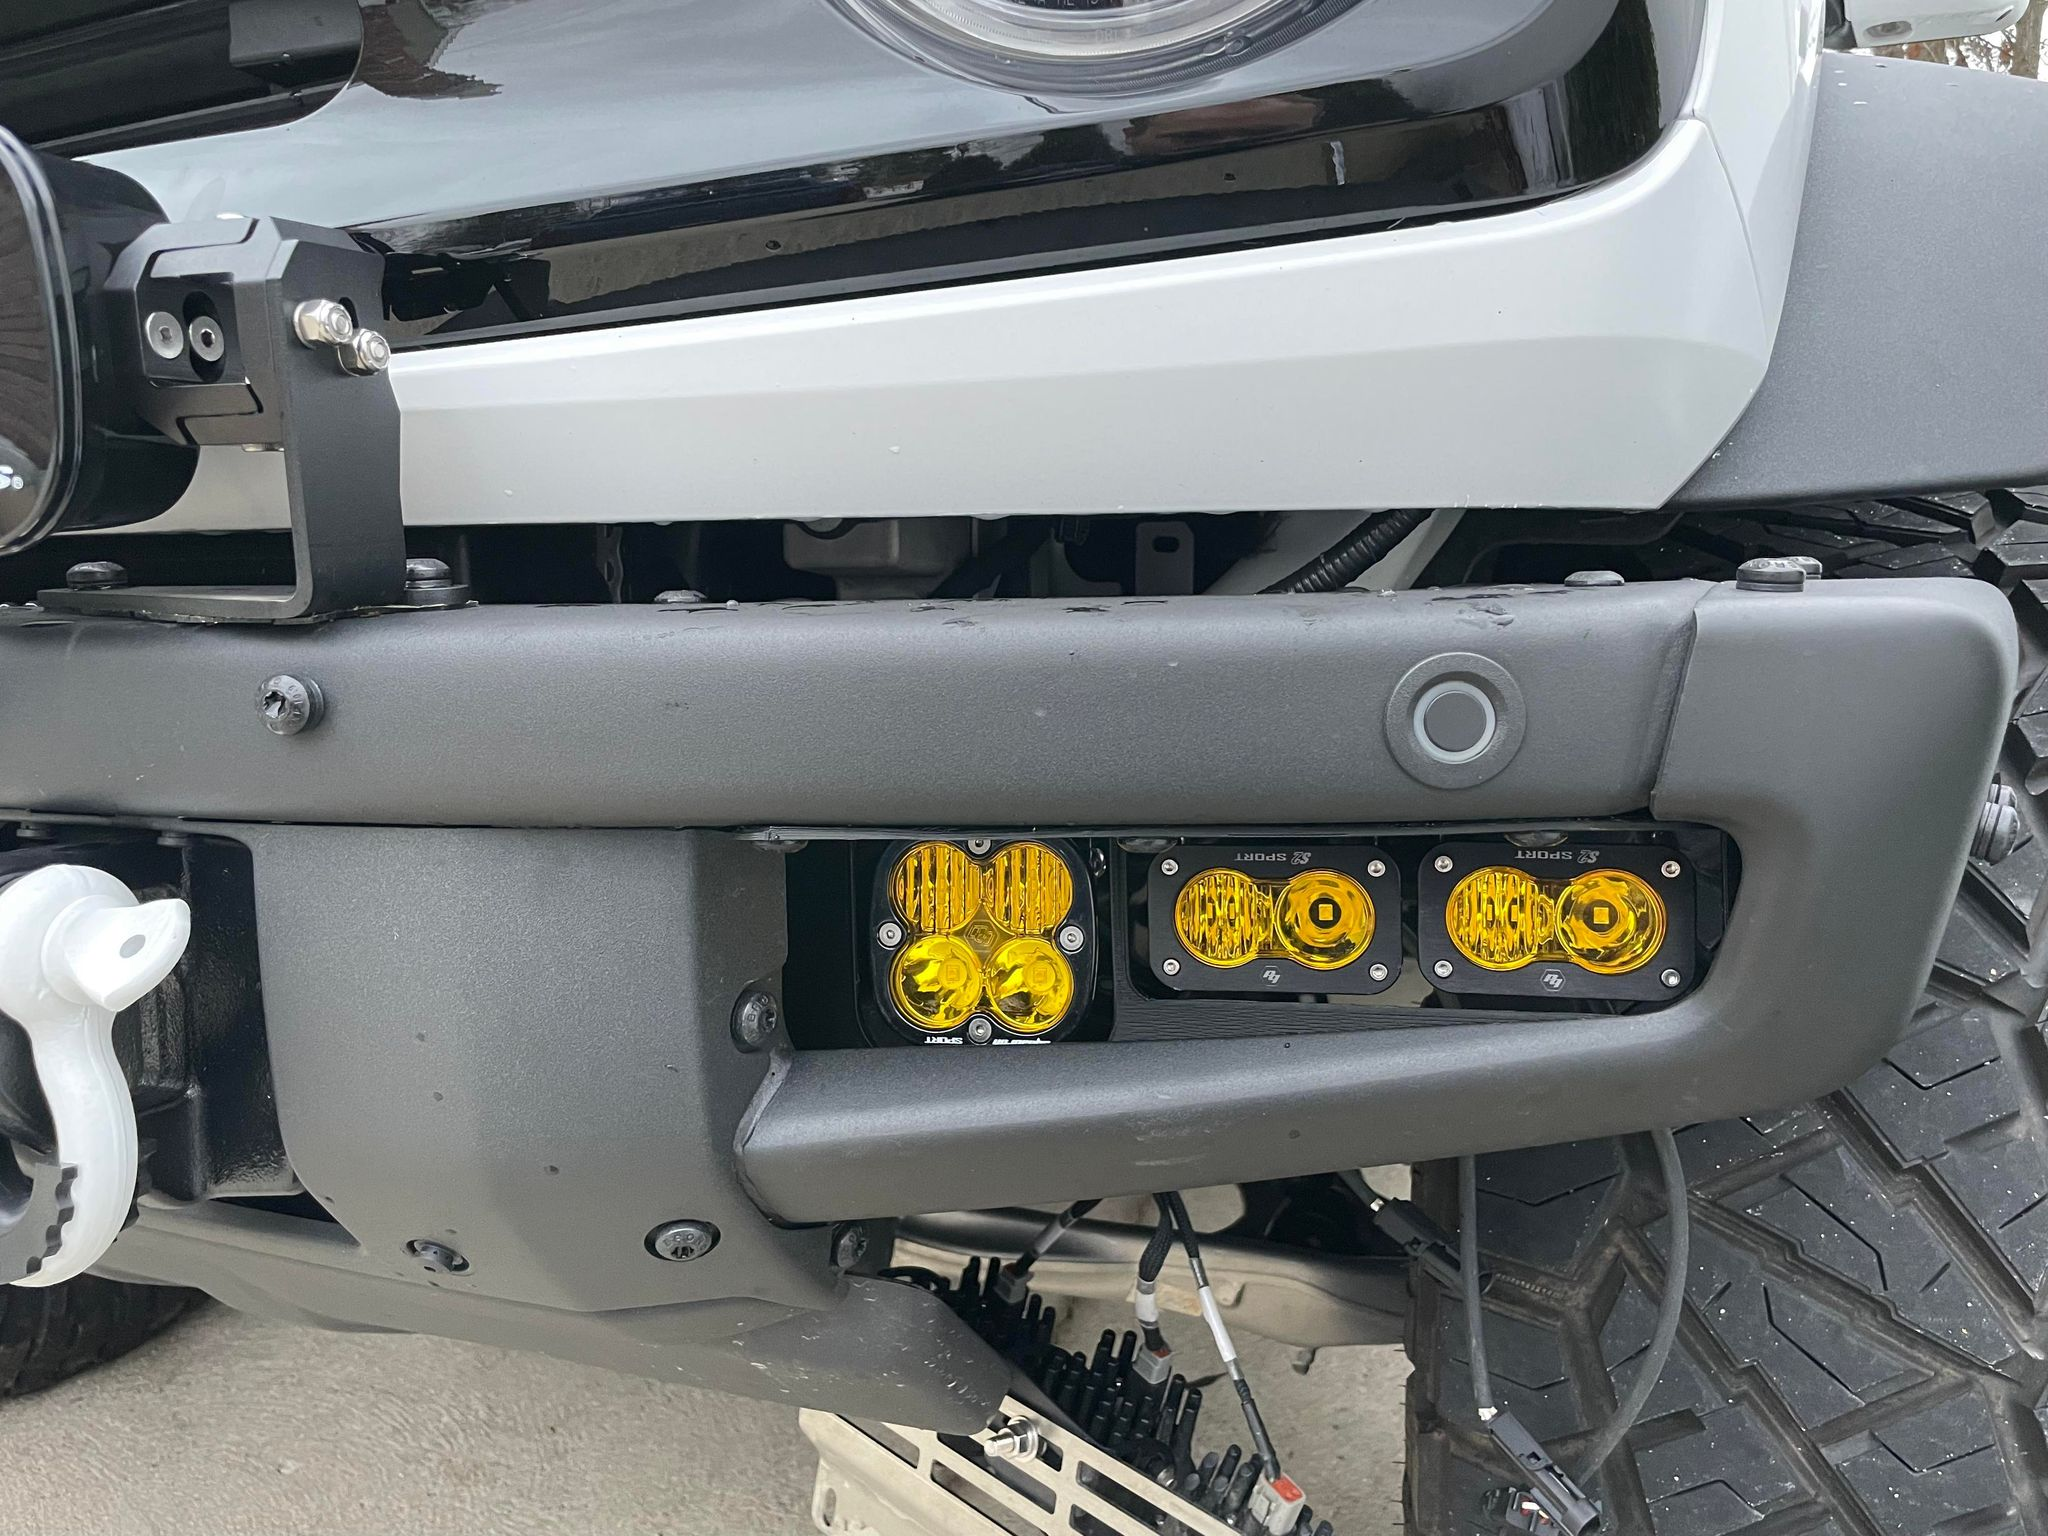 Ford Bronco TRIPLE FOG KITS | New Flush Mount Kit Now Available at 4x4TruckLEDs.com 1642455099412